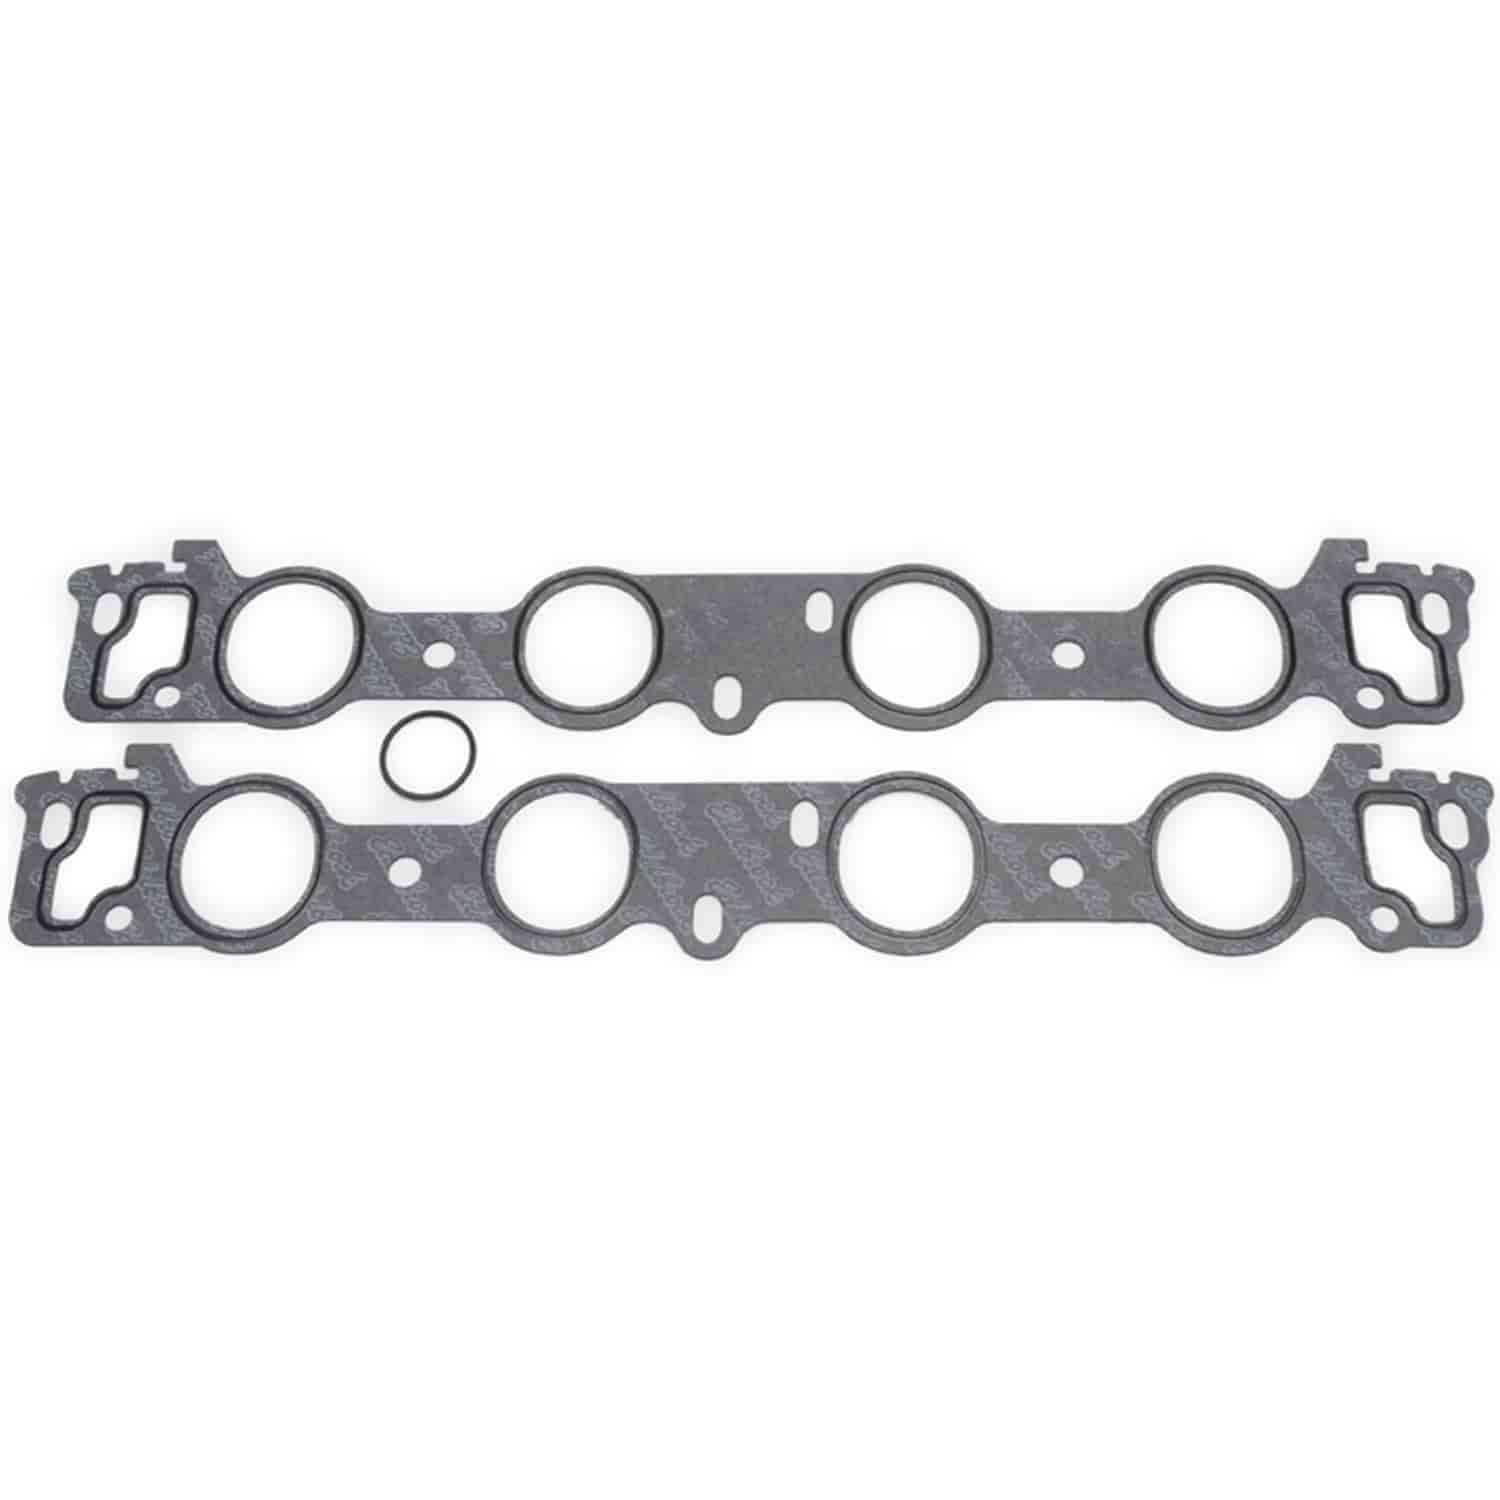 Intake Gaskets for Big Block Ford 429/460